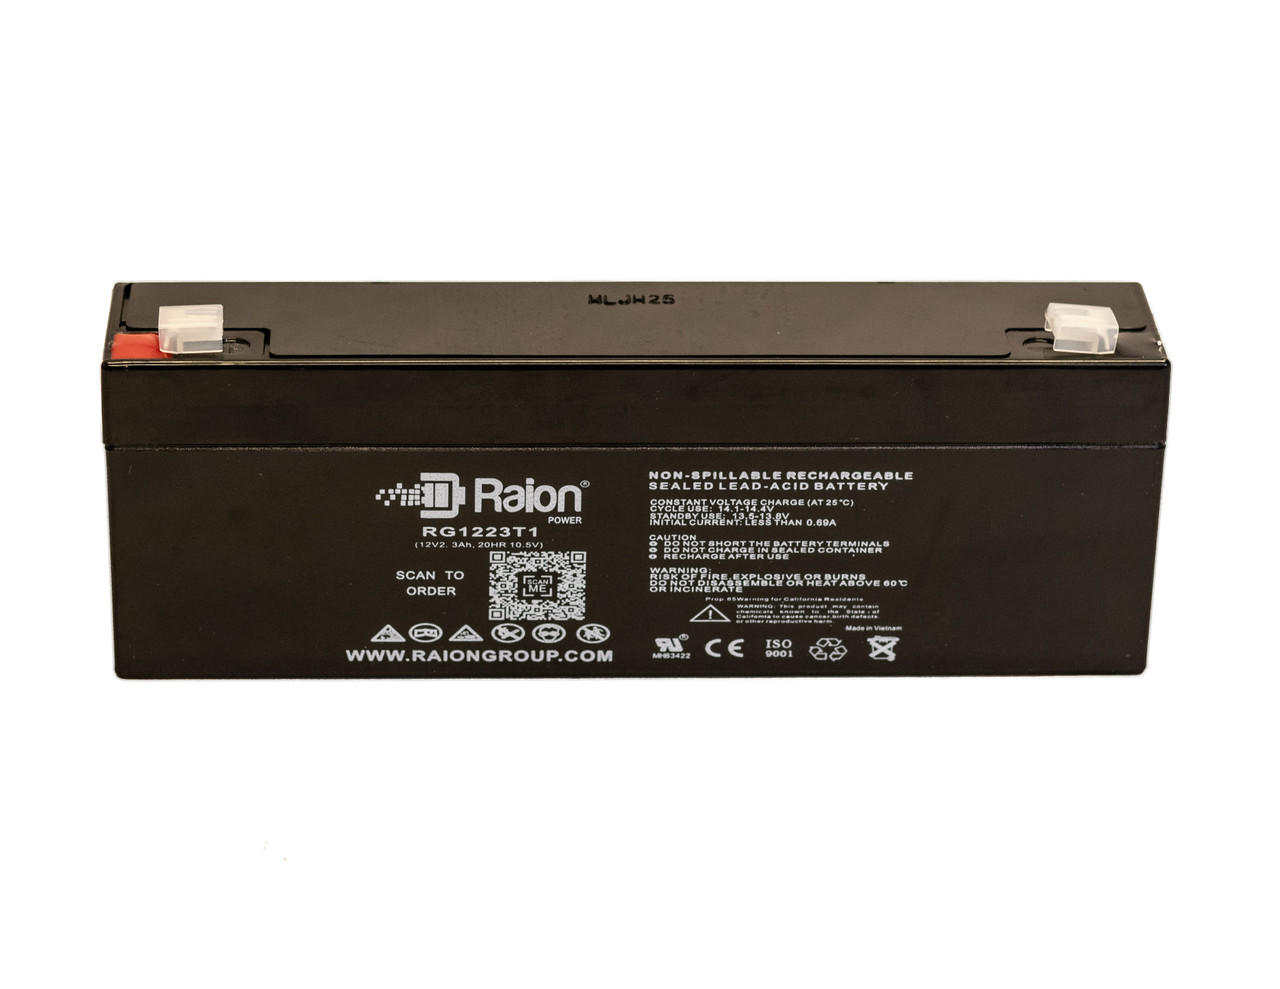 Raion Power 12V 2.3Ah SLA Battery With T1 Terminals For Dr Power Equipment 24749